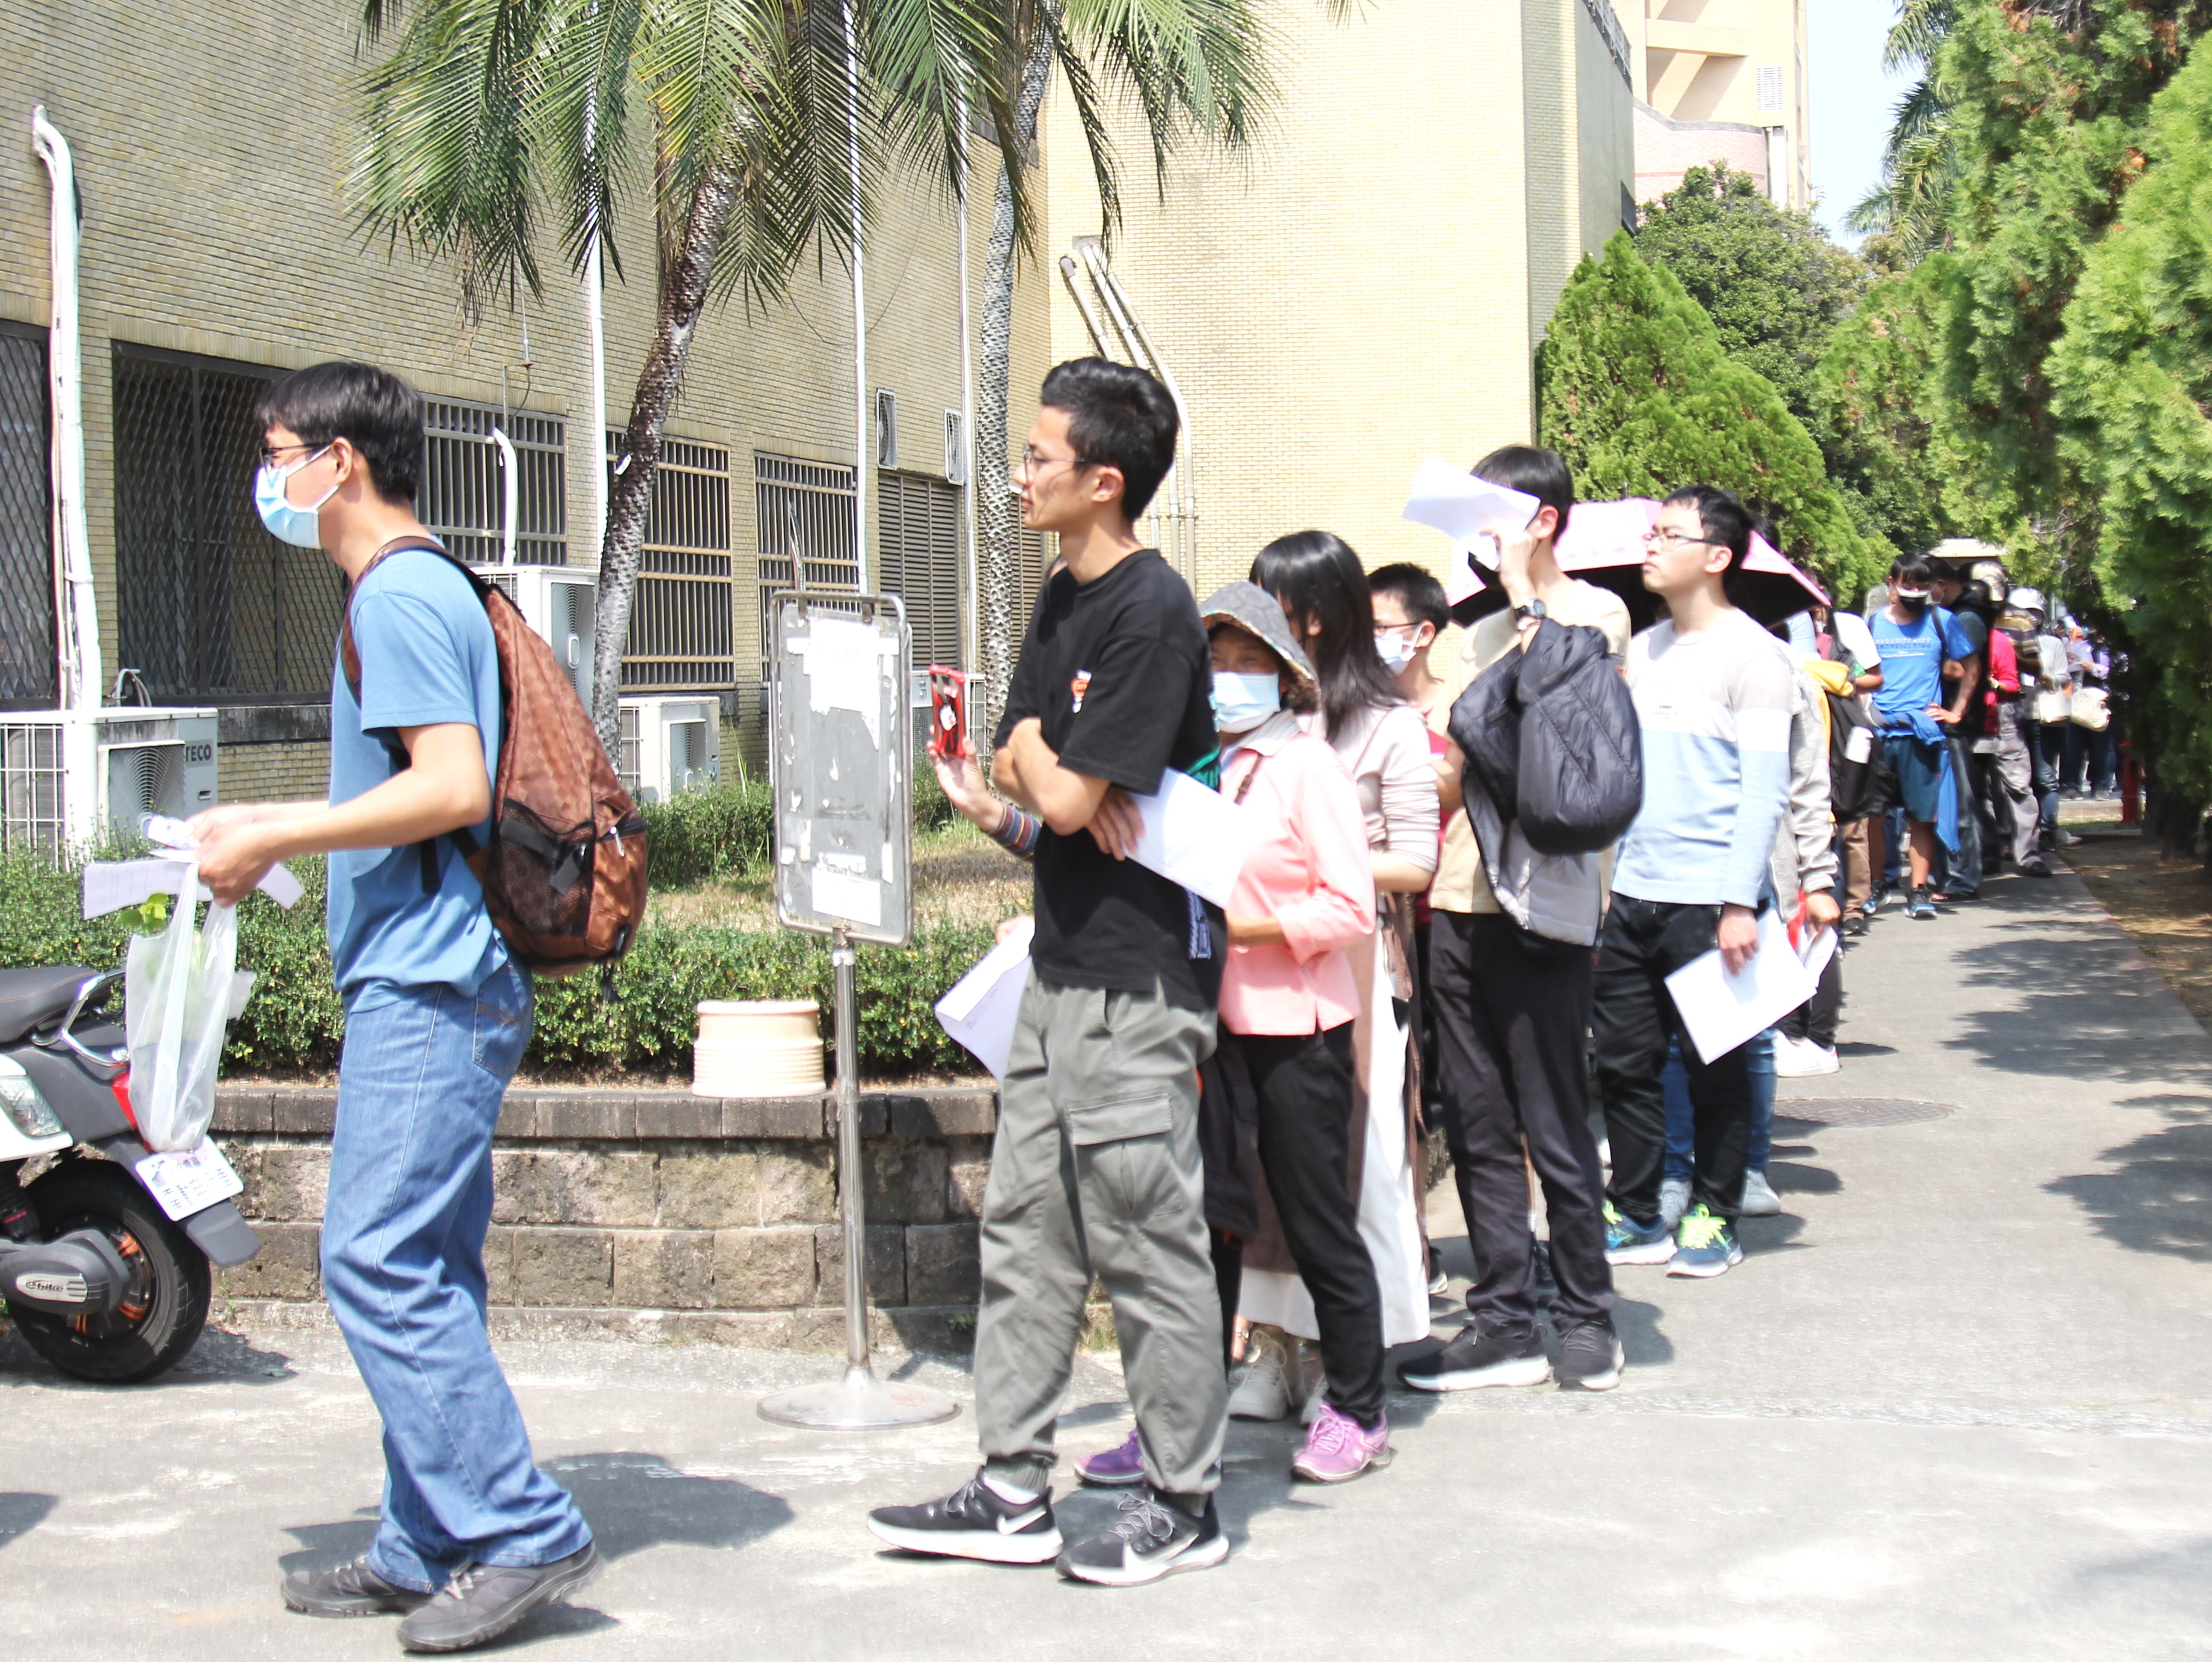 At the Forest Week this year, a long line of people lined up for the the seedlings exchange event inside and outside the campus.